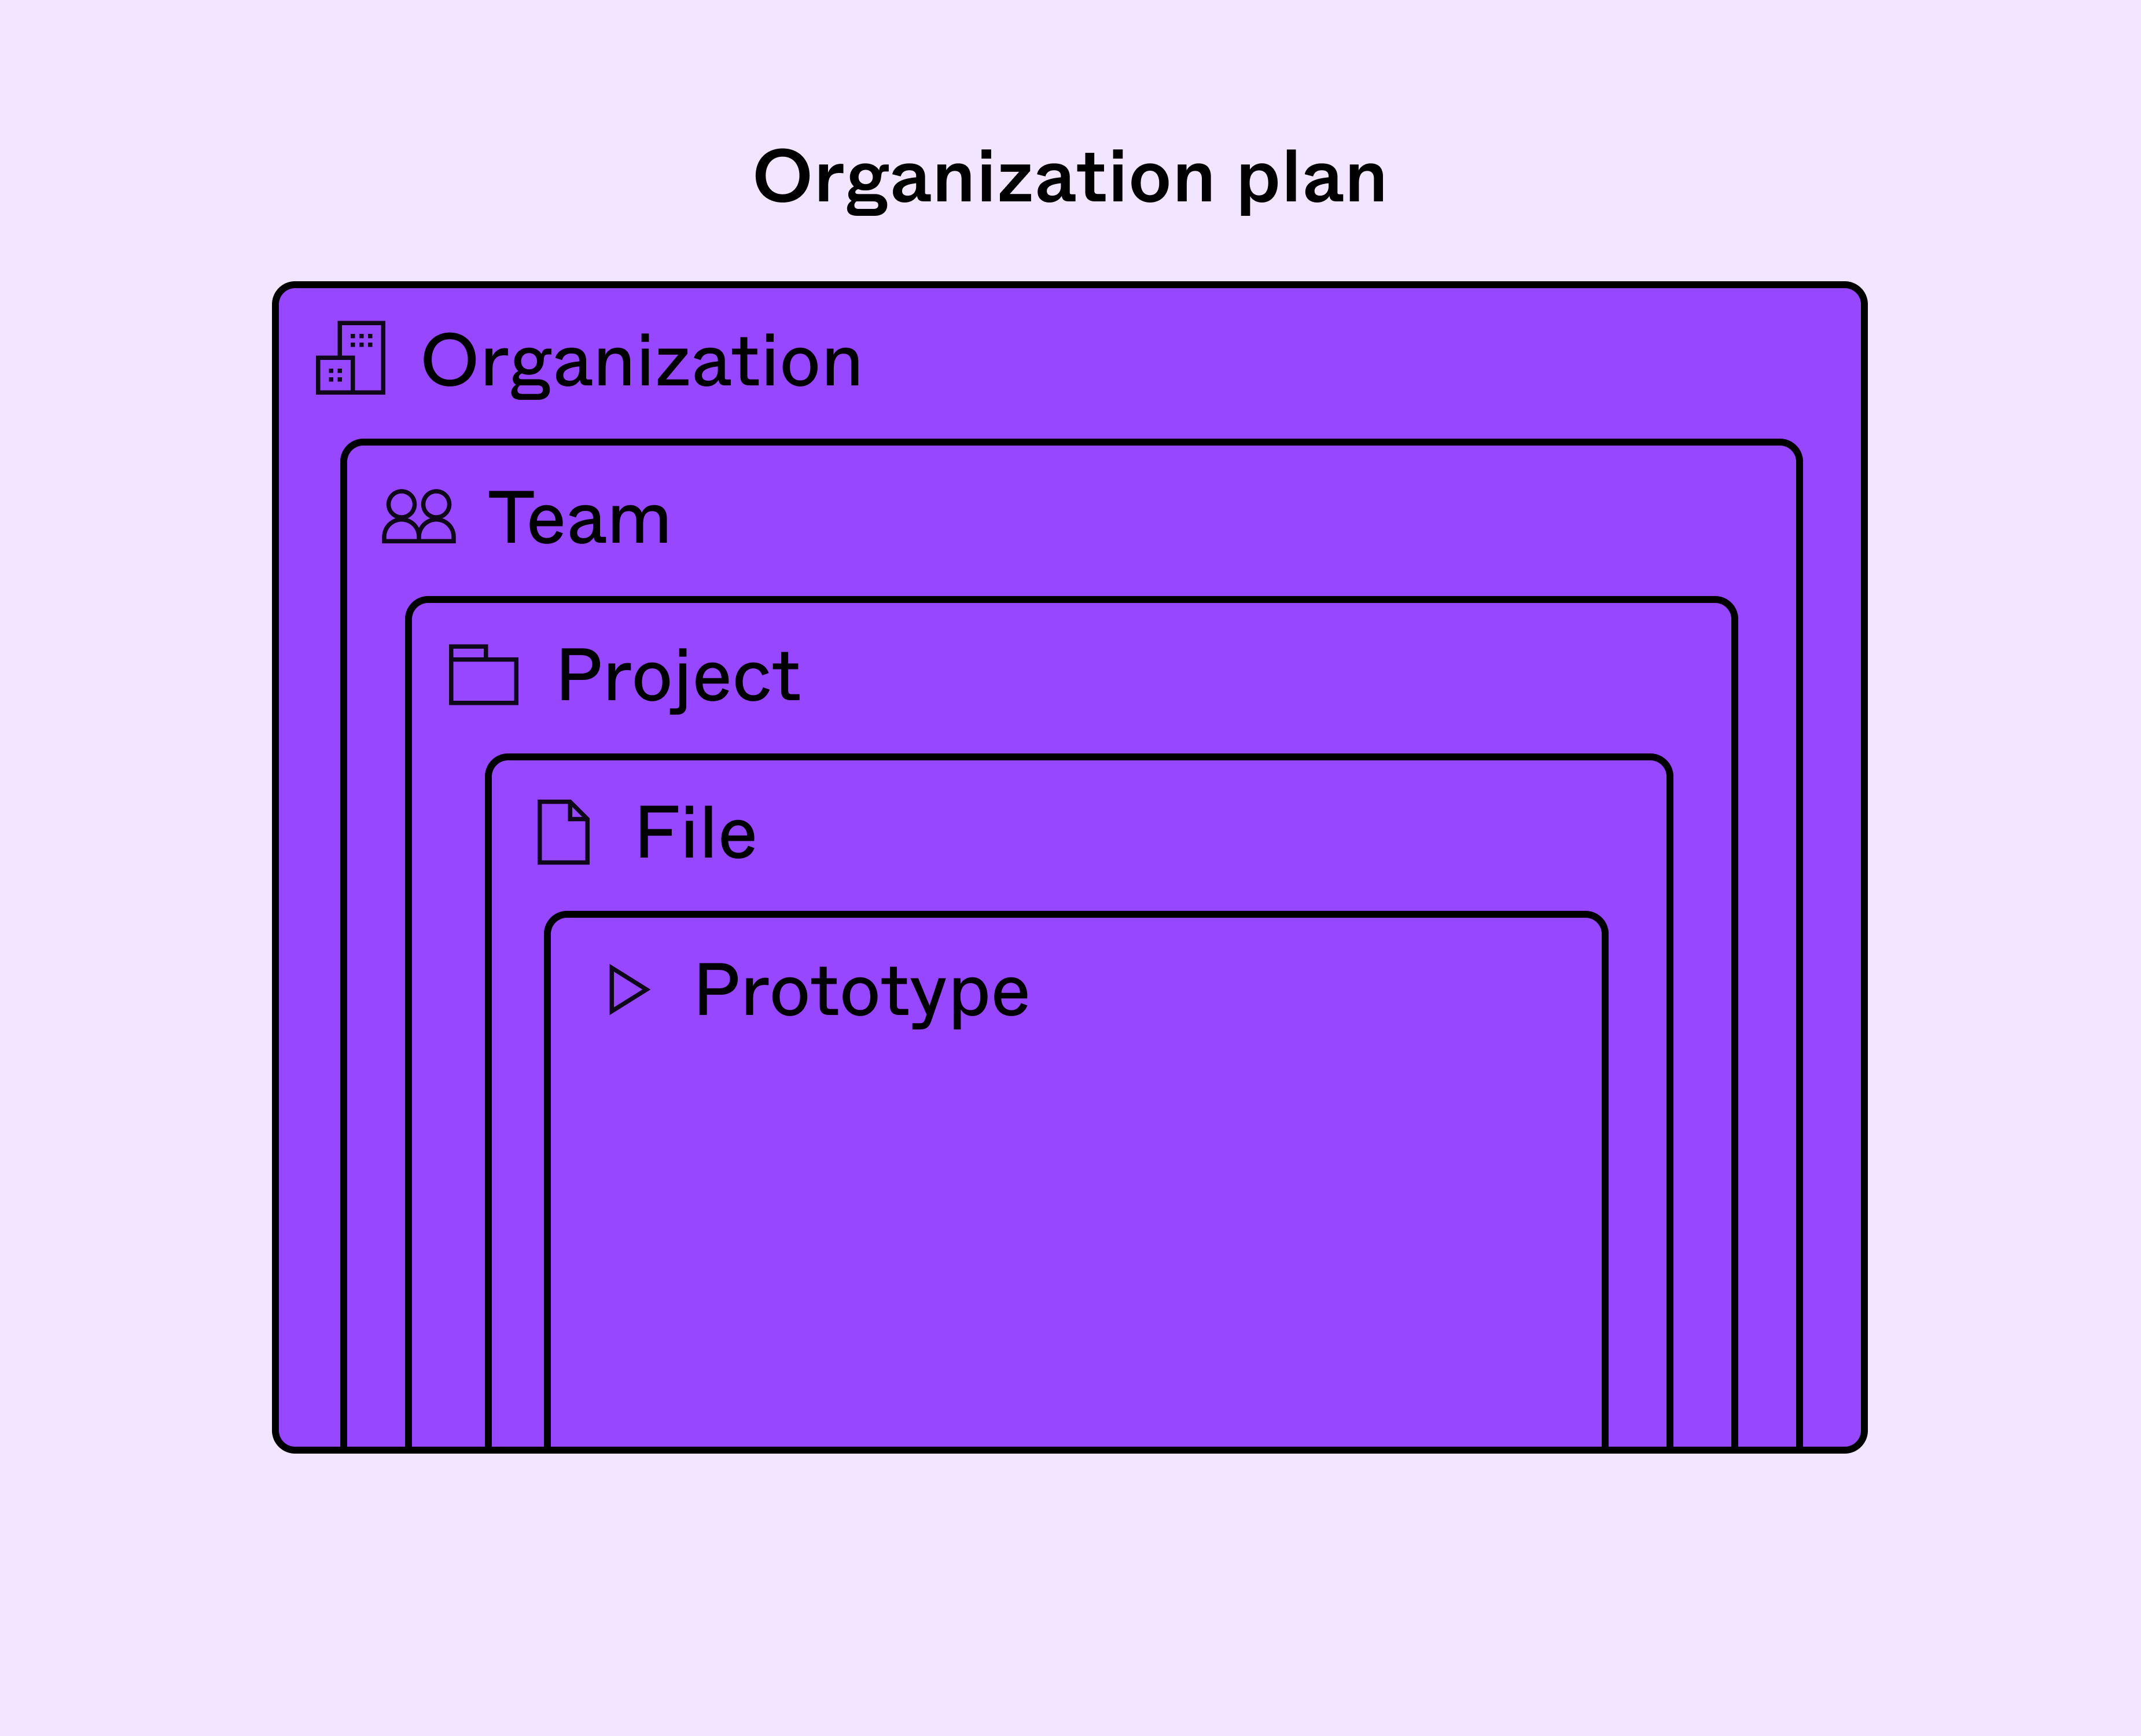 Share the organization, teams, projects, files, or prototypes on the Organization plan